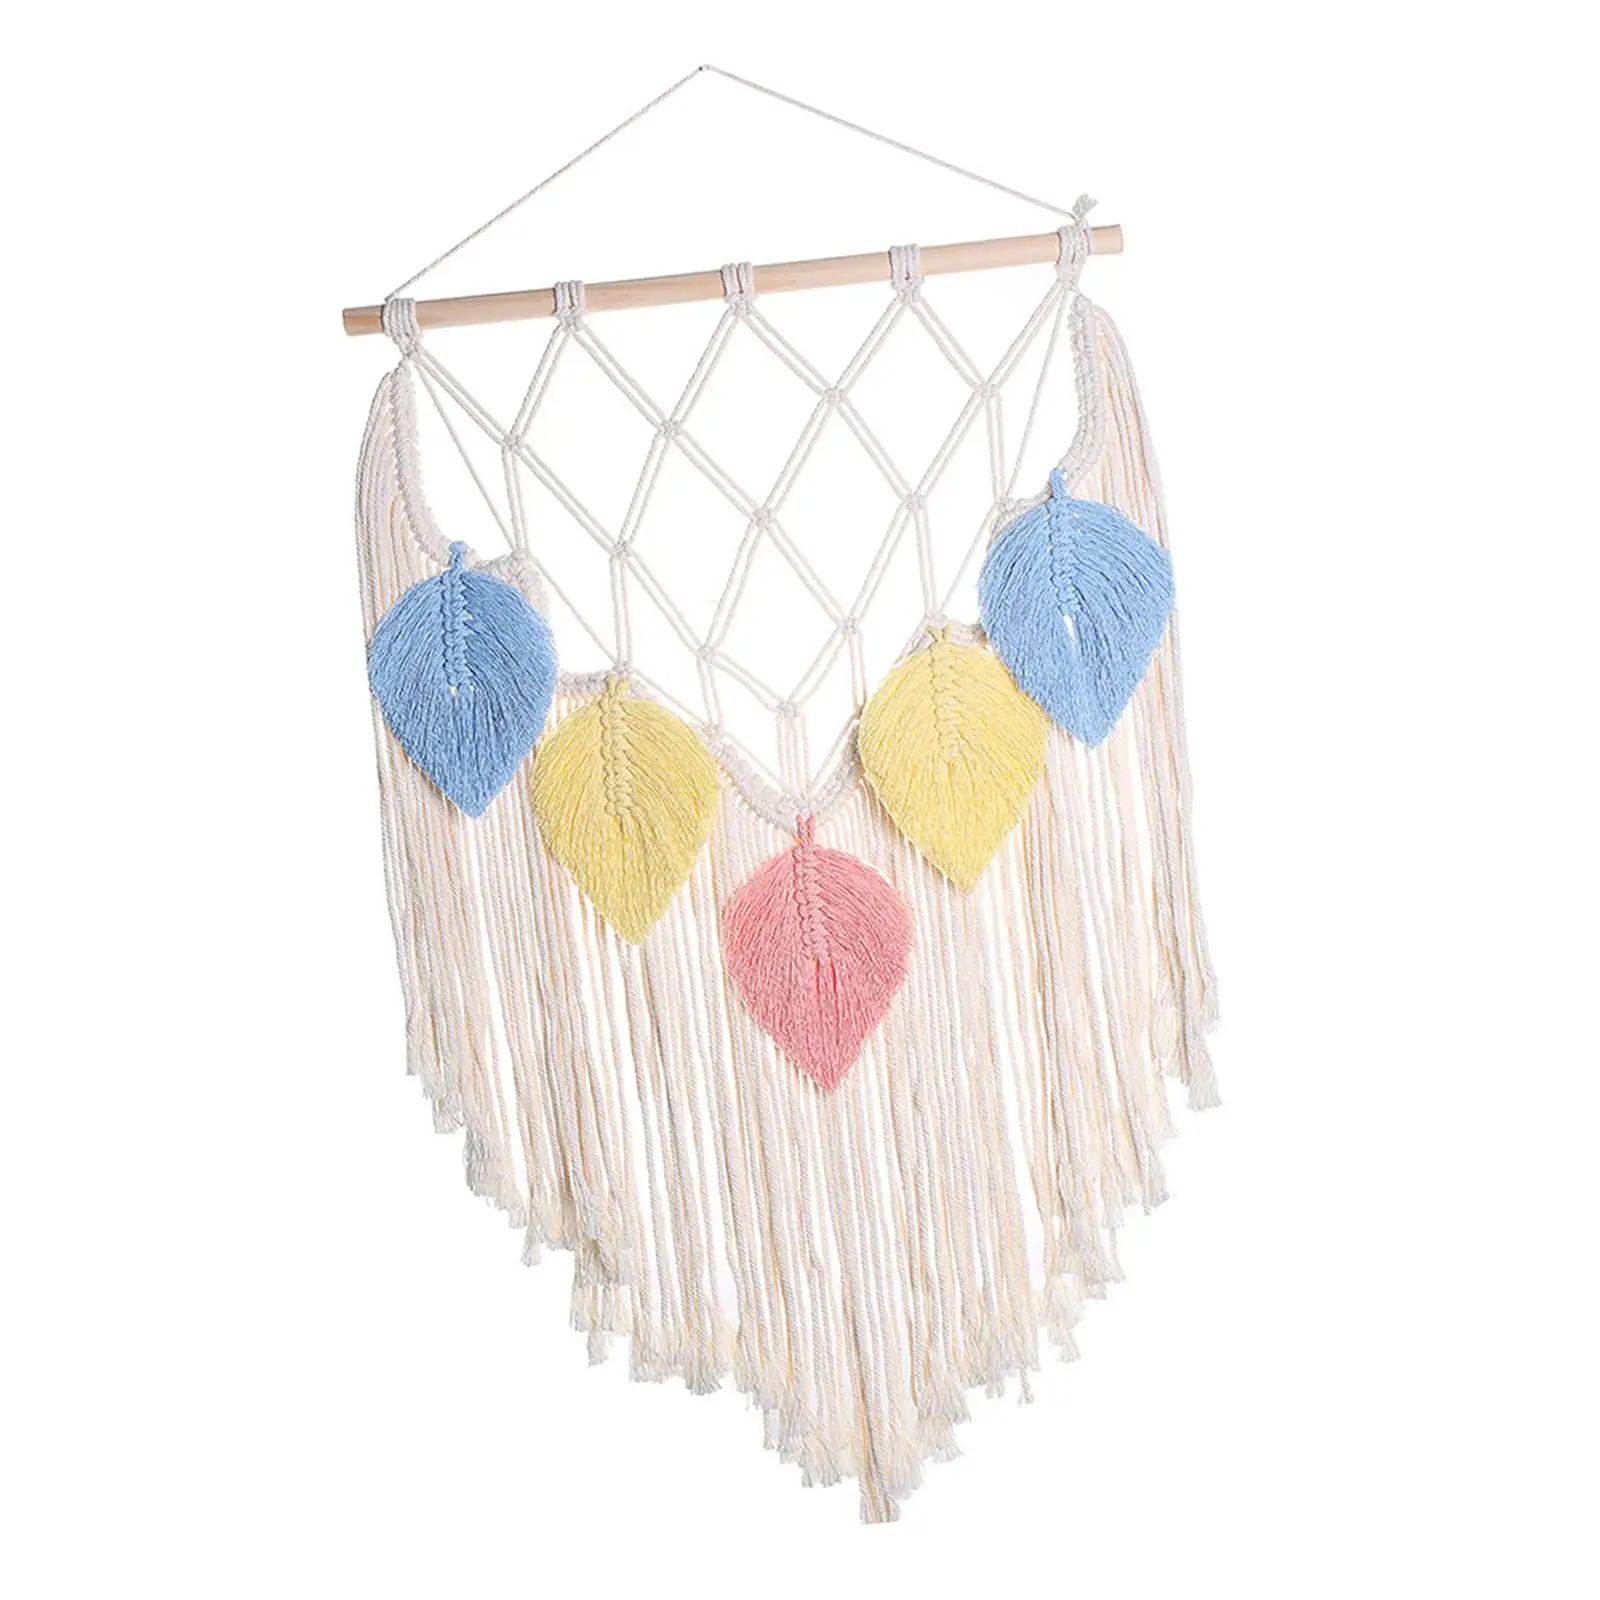 

Tassels Macrame Wall Hanging Tapestry Boho Wall Decor Handmade Woven Tapestry for Apartment Backdrop Living Room Party Bedroom